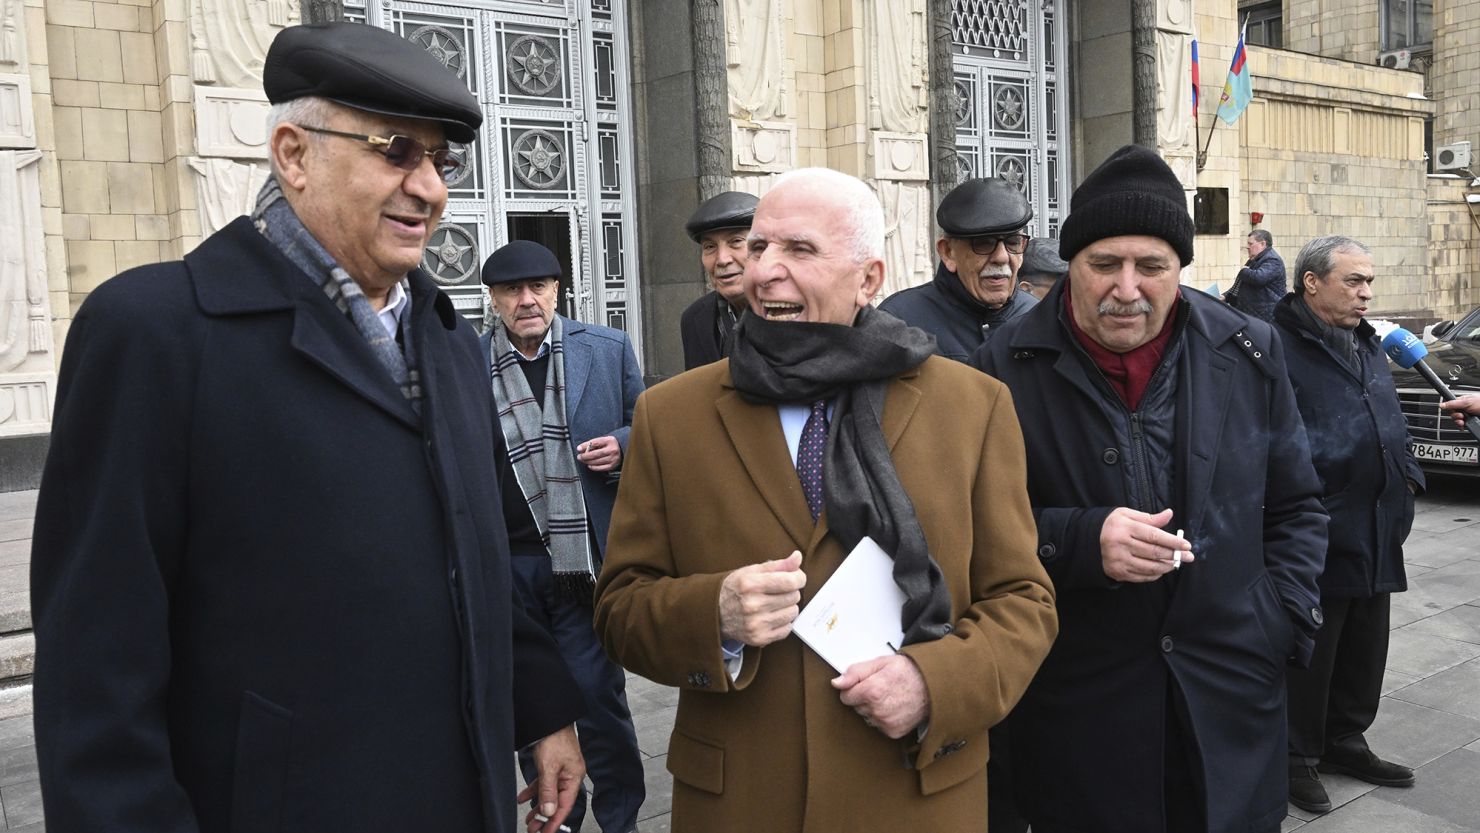 Azzam Al-Ahmad, a member of Fatah's central committee and the Executive Committee of the Palestine Liberation Organization (PLO), leaves after the intra-Palestinian meeting in Moscow.